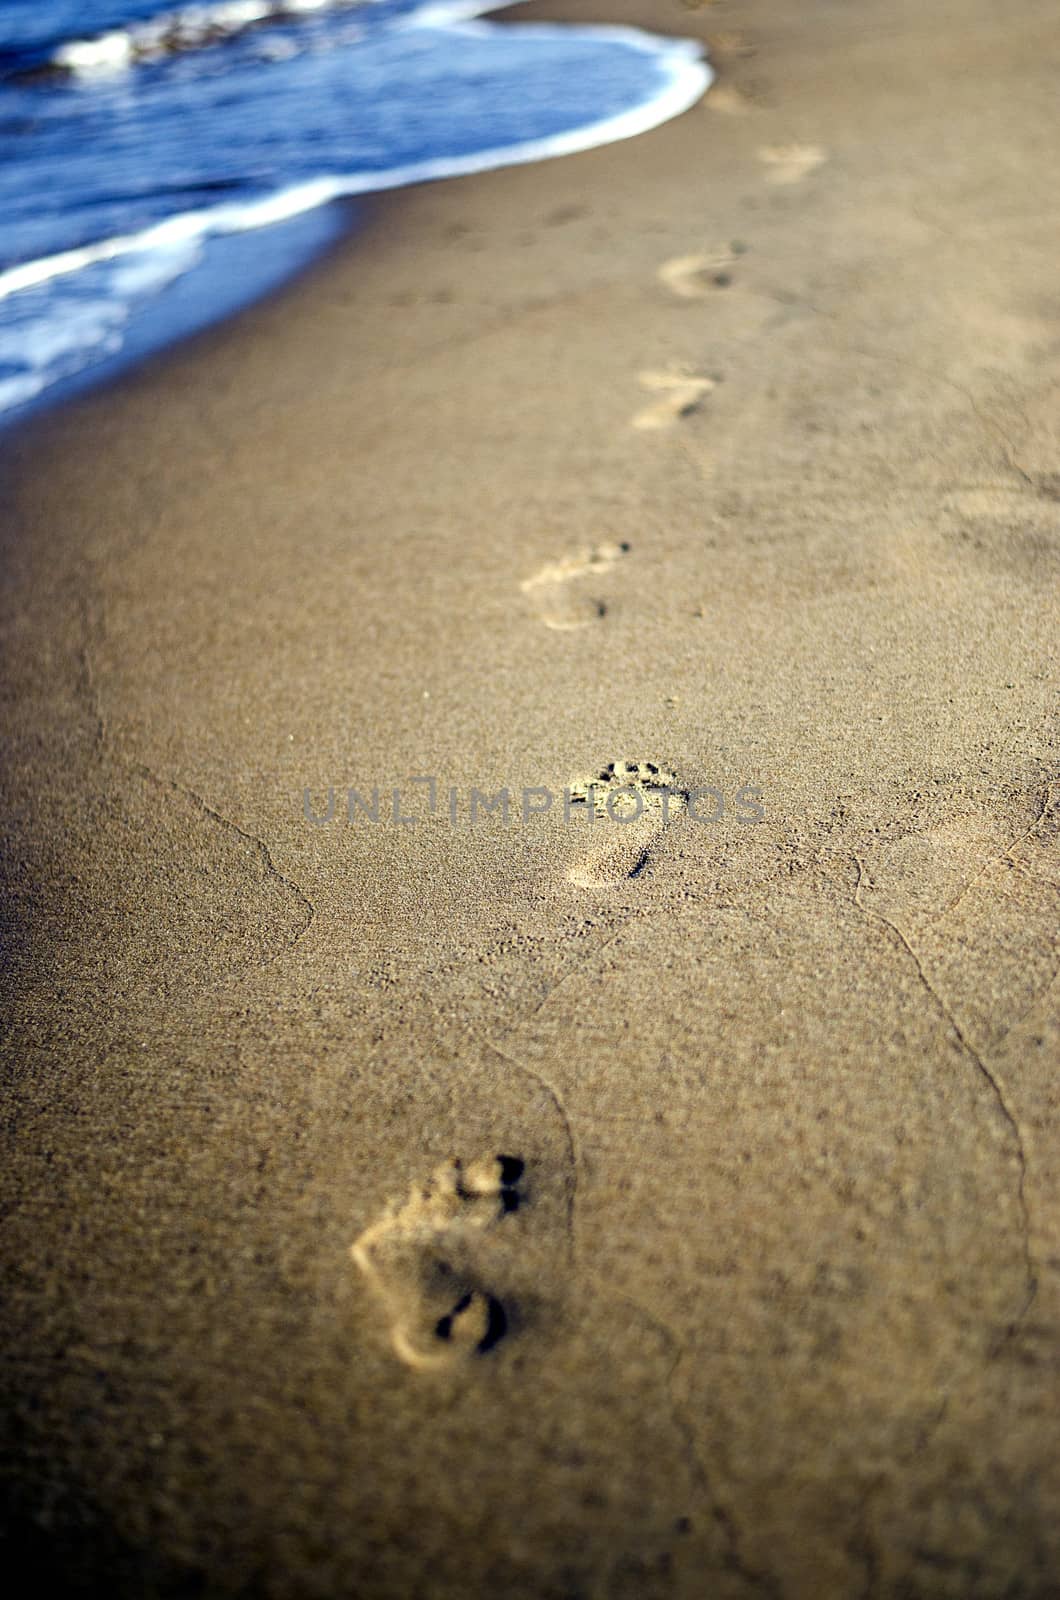 Barefoot footsteps in a sand with sea waves in background.